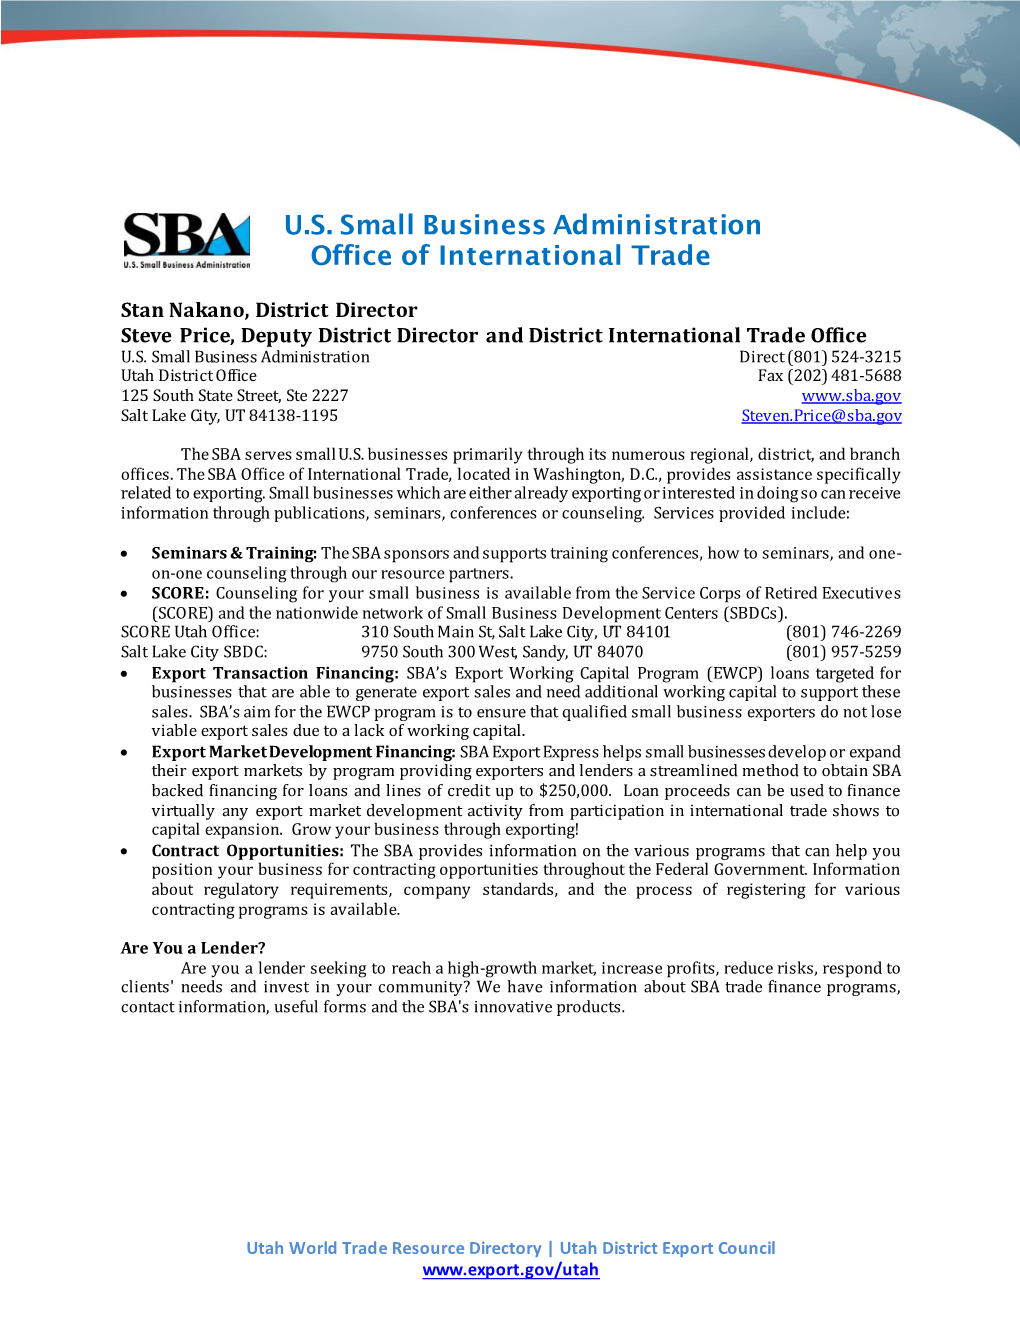 U.S. Small Business Administration Office of International Trade